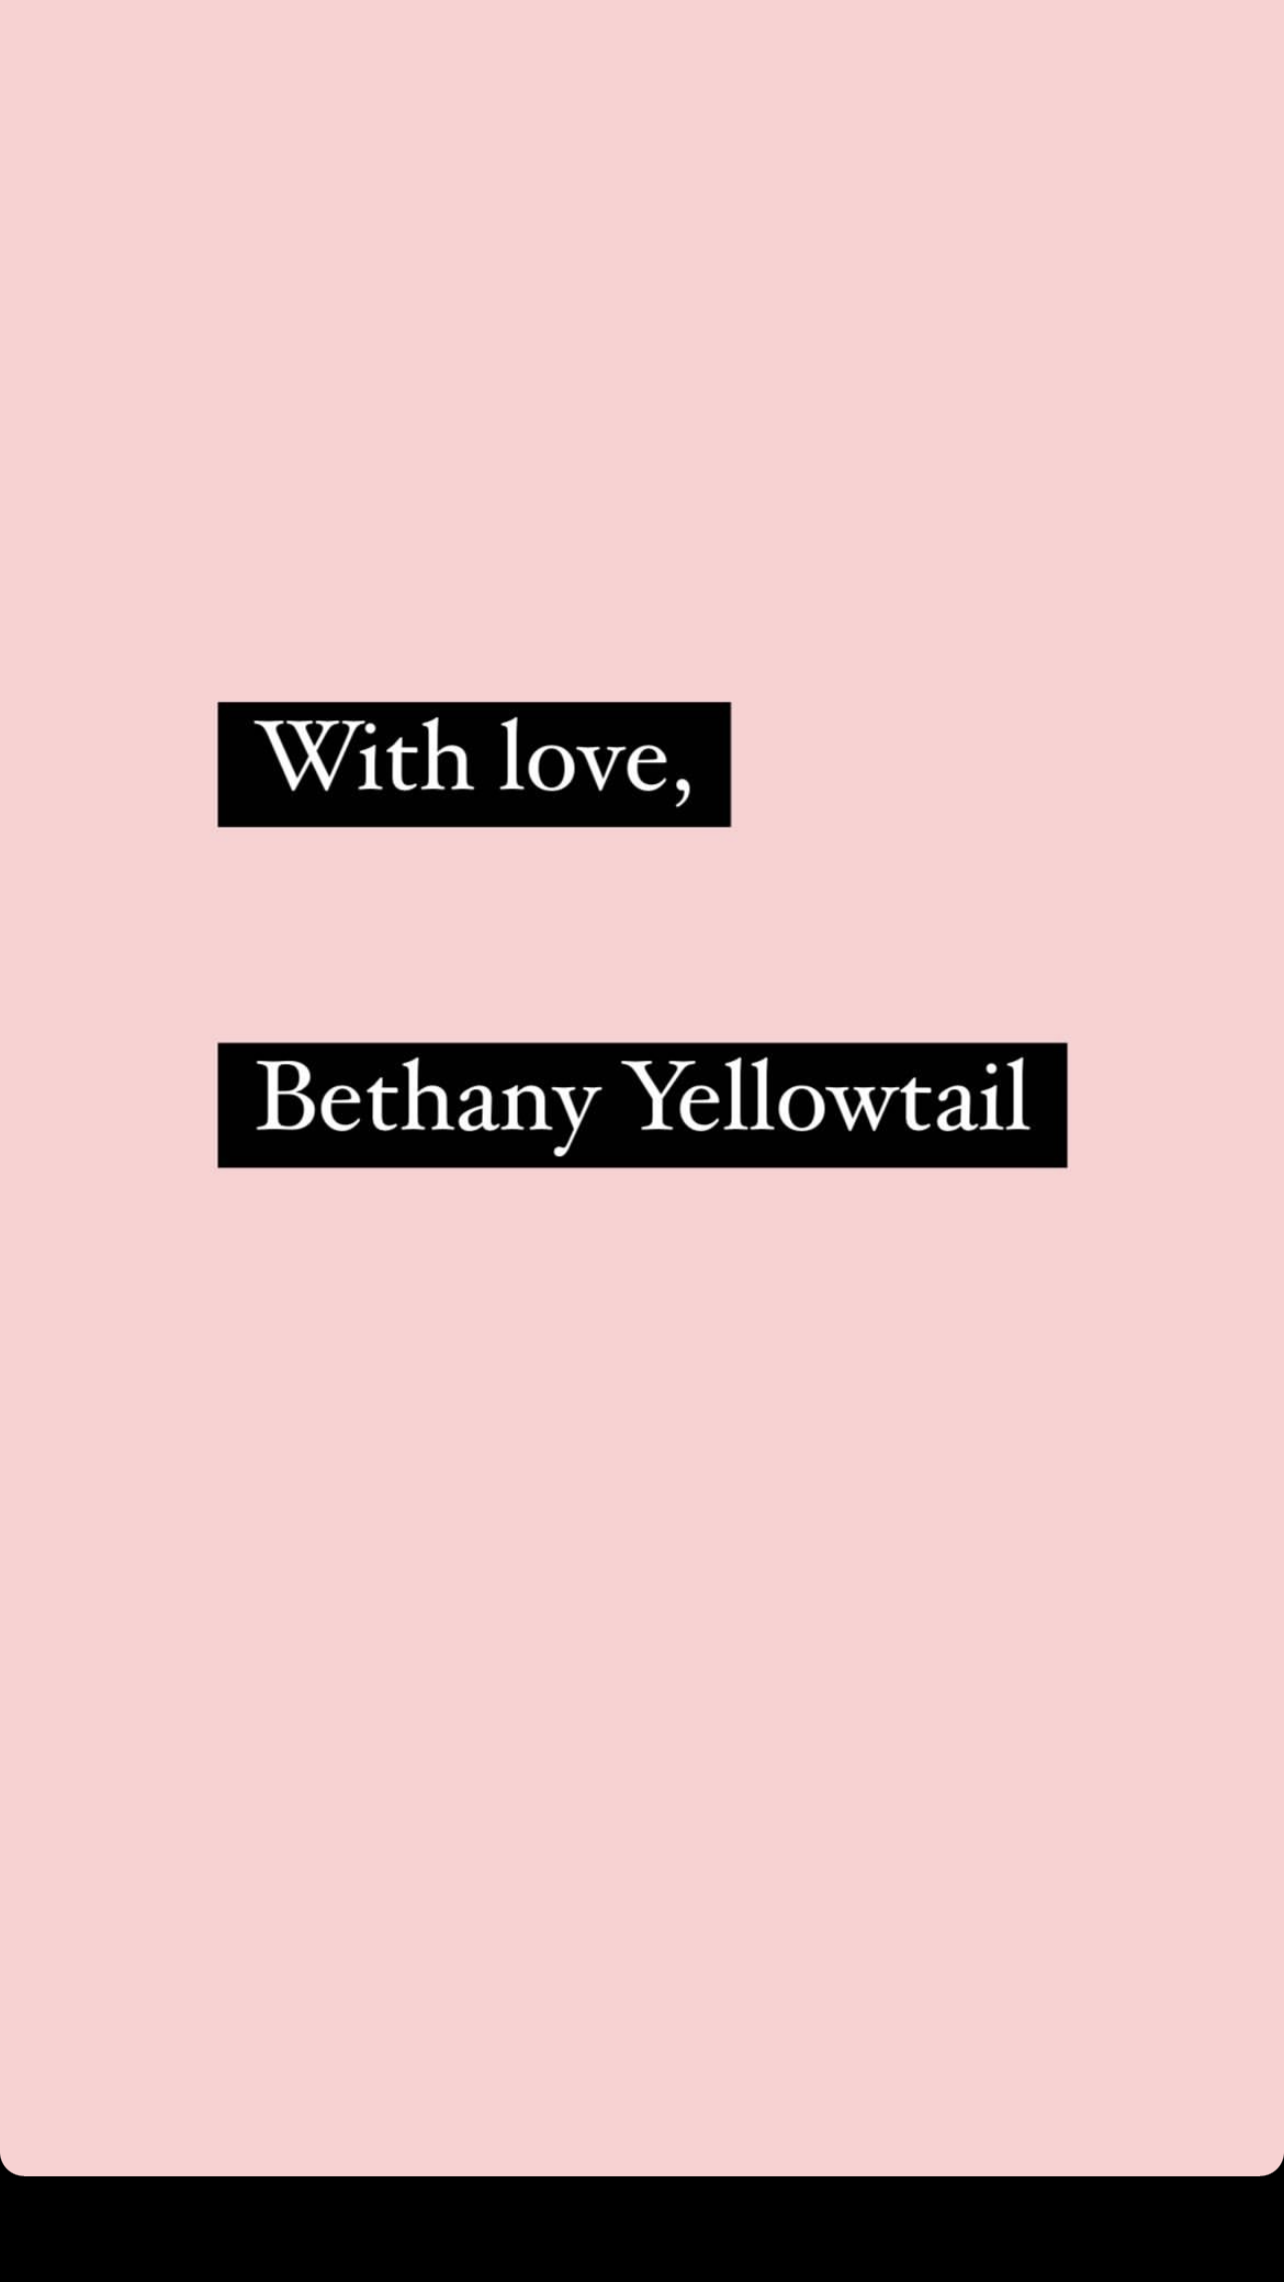 Bethany Yellowtail on Instagram